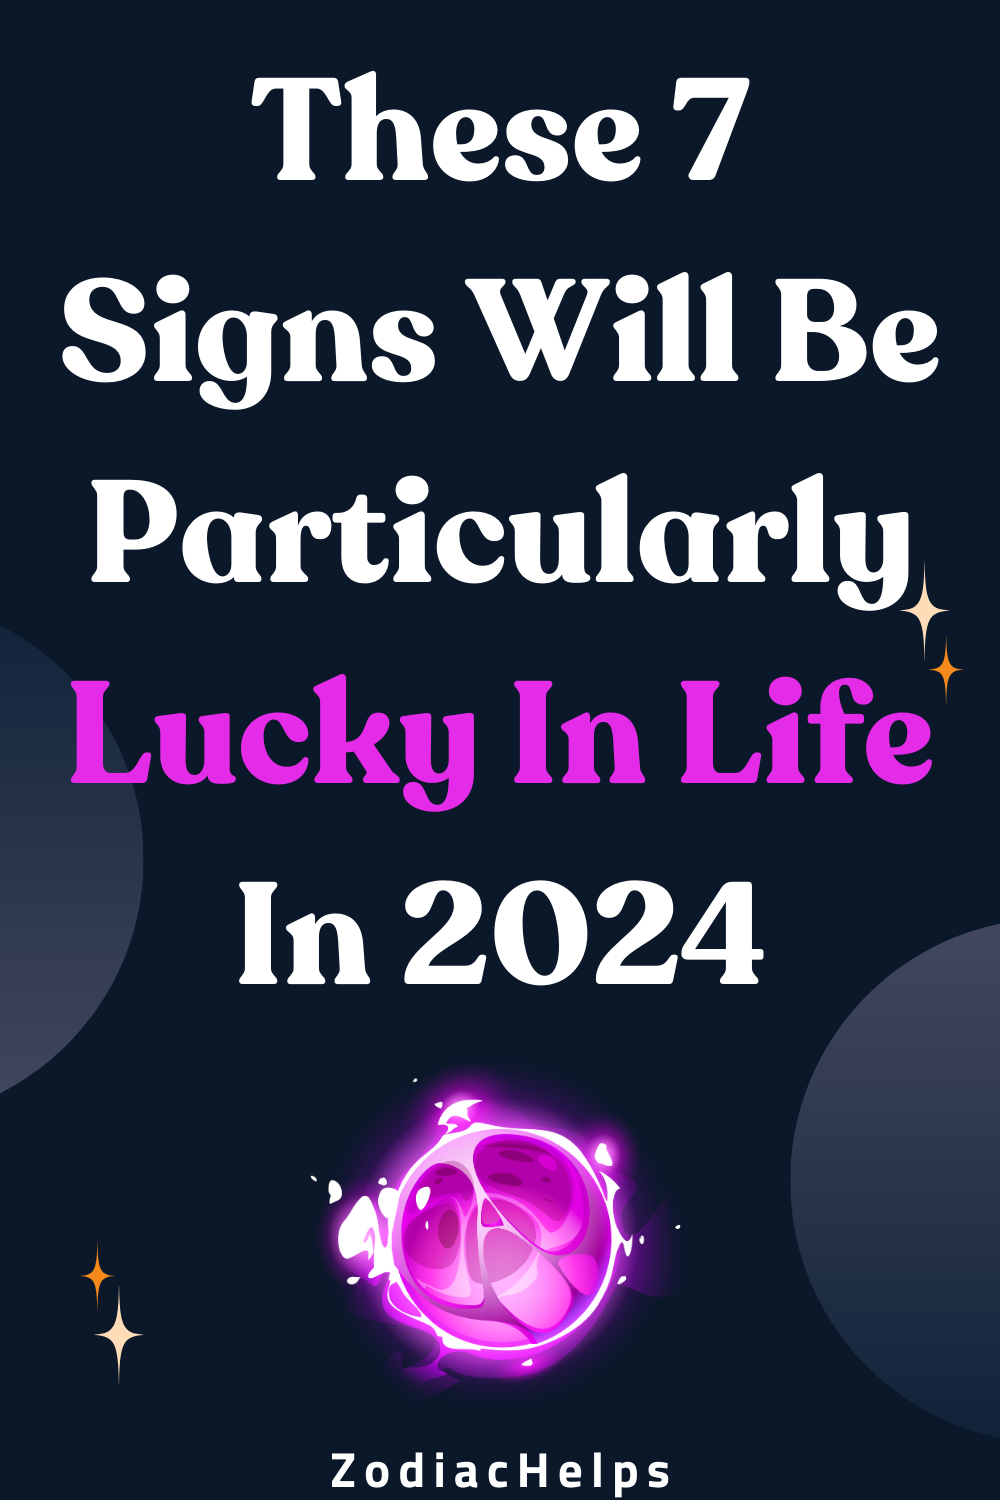 These 7 Signs Will Be Particularly Lucky In Life In 2024